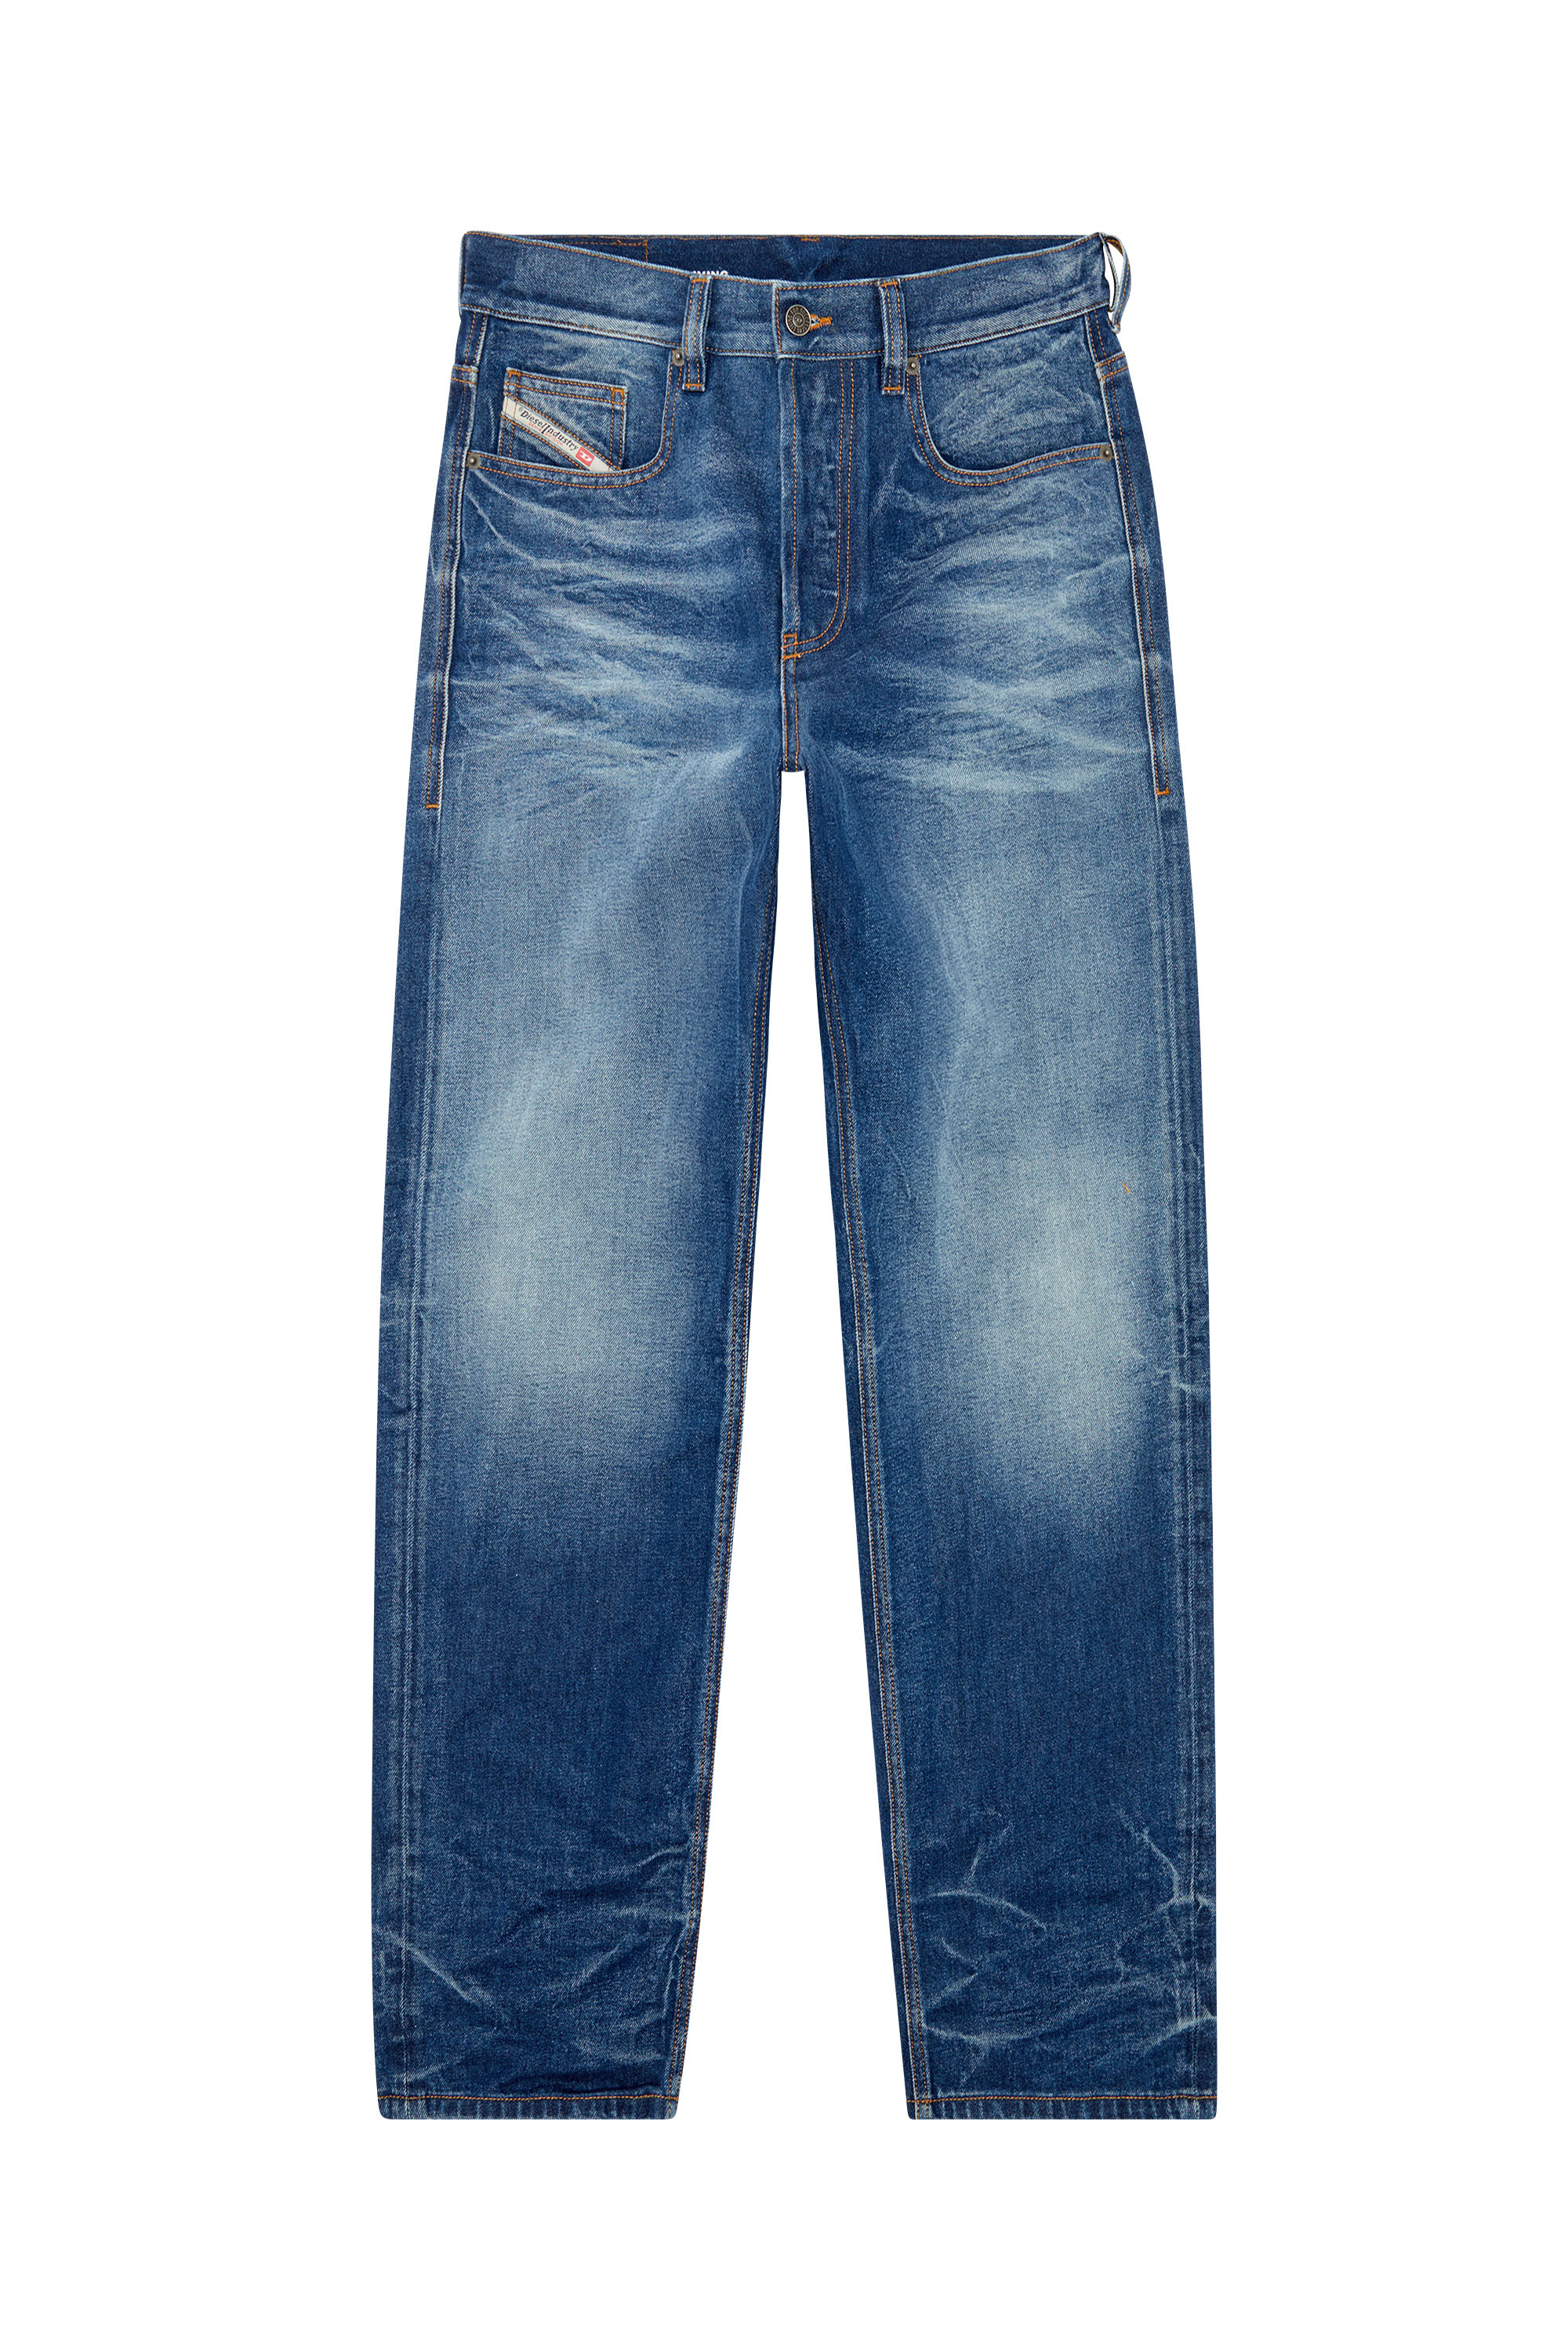 Diesel - Straight Jeans 2010 D-Macs 09I46, Hombre Straight Jeans - 2010 D-Macs in Azul marino - Image 3